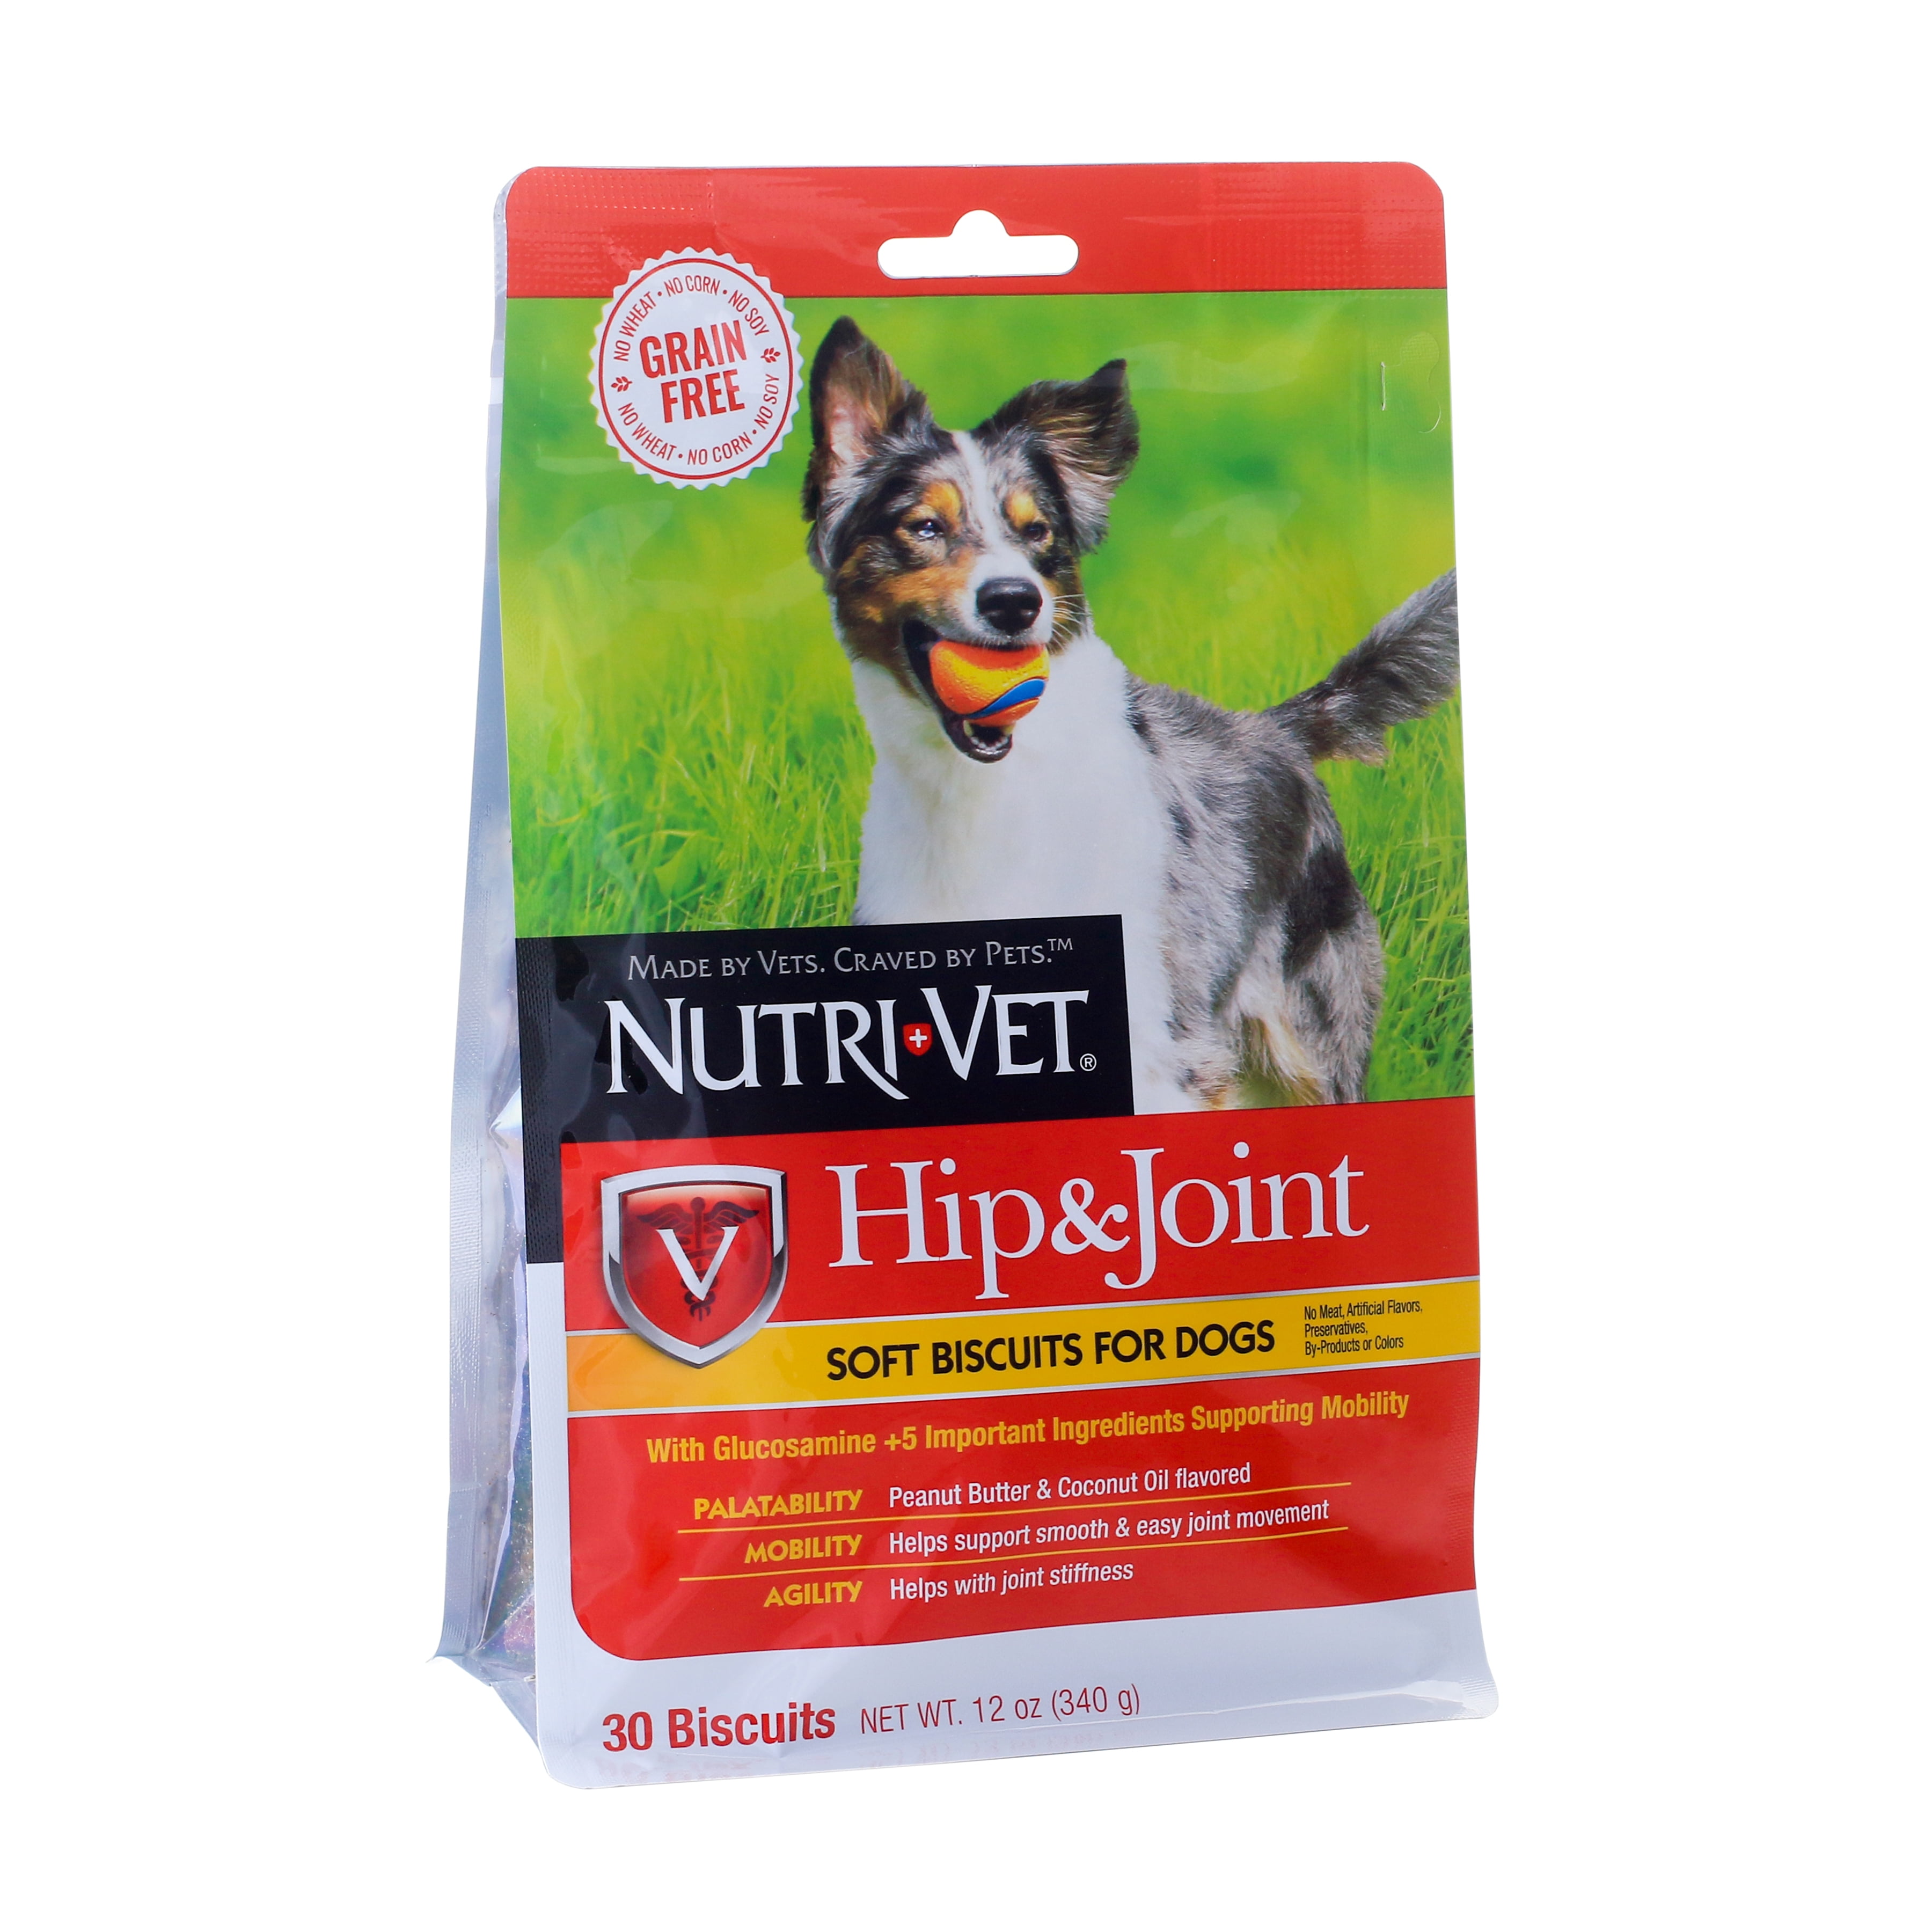 Nutri-Vet GRAIN FREE Hip & Joint Soft Biscuits for Dogs 30ct - 250 mg ...